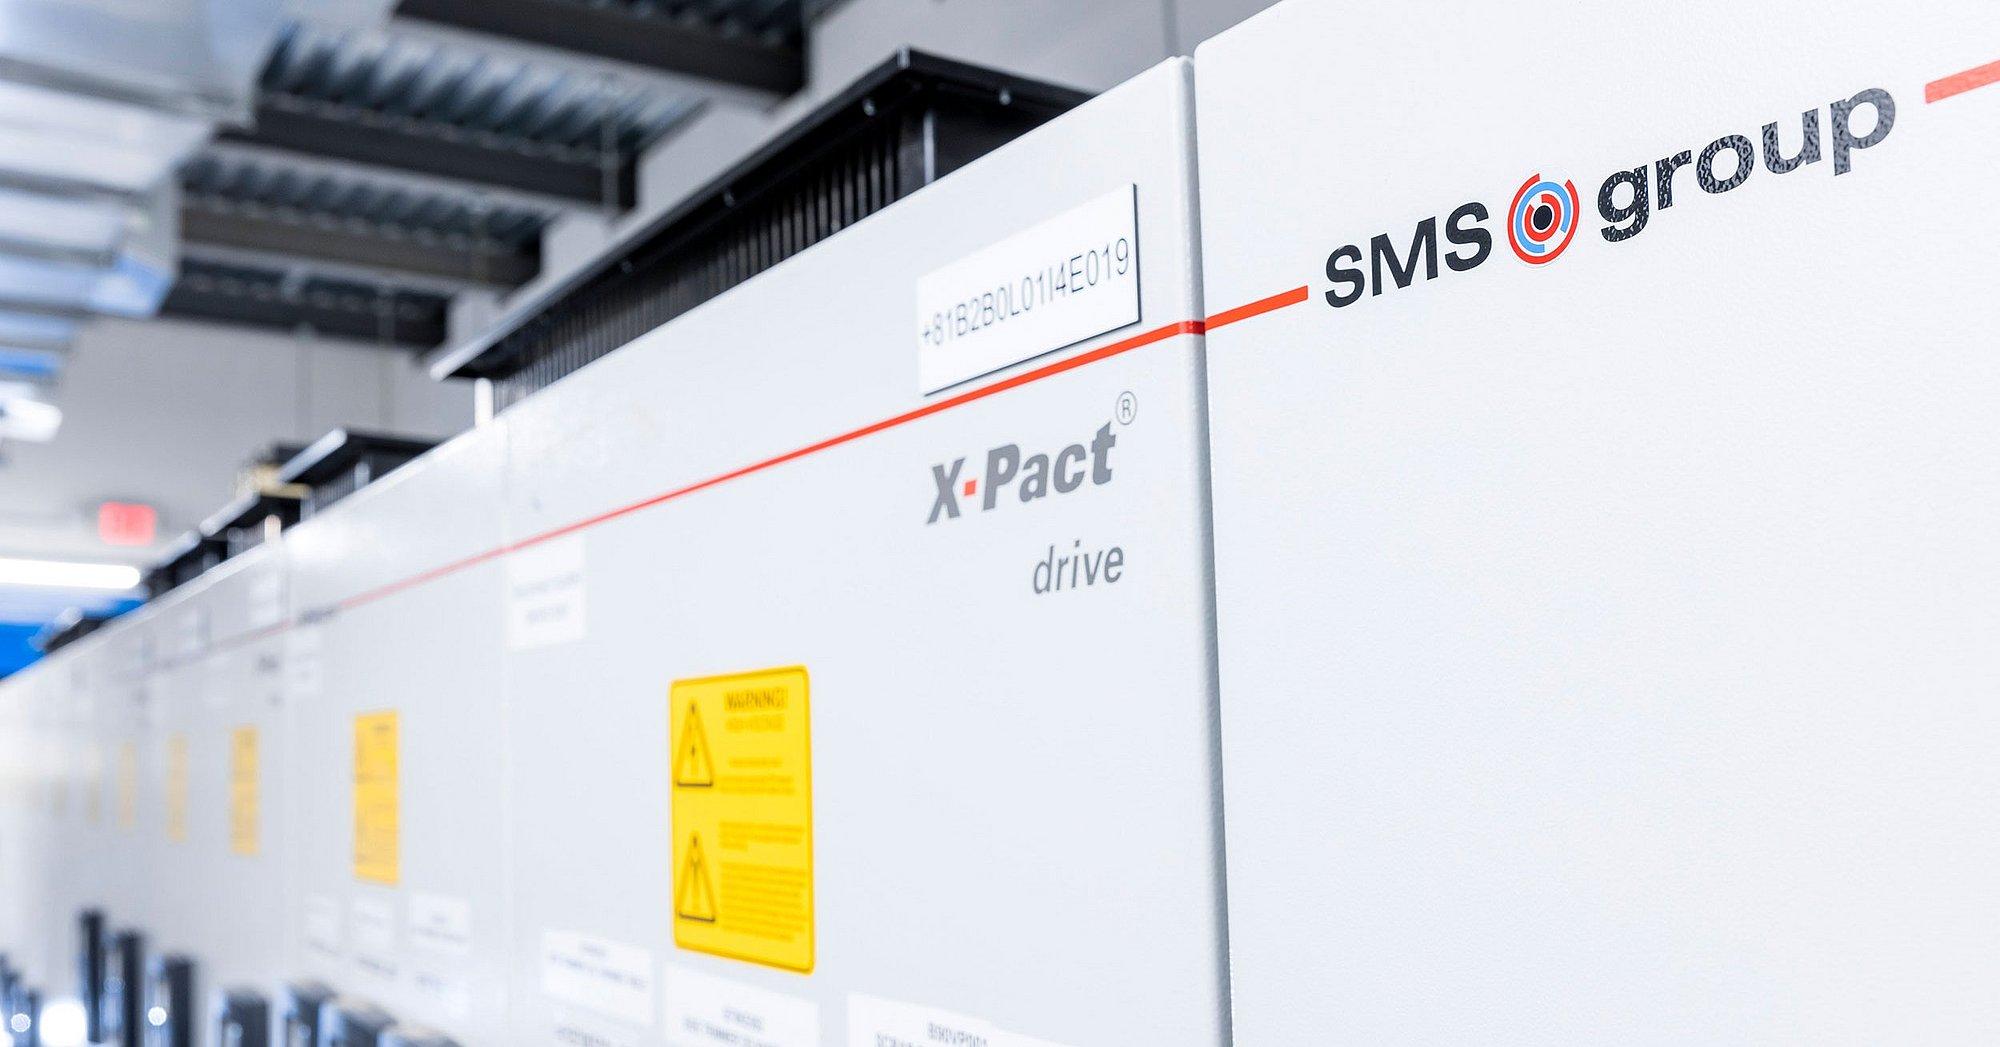 Product: X-Pact® Drive - SMS group GmbH